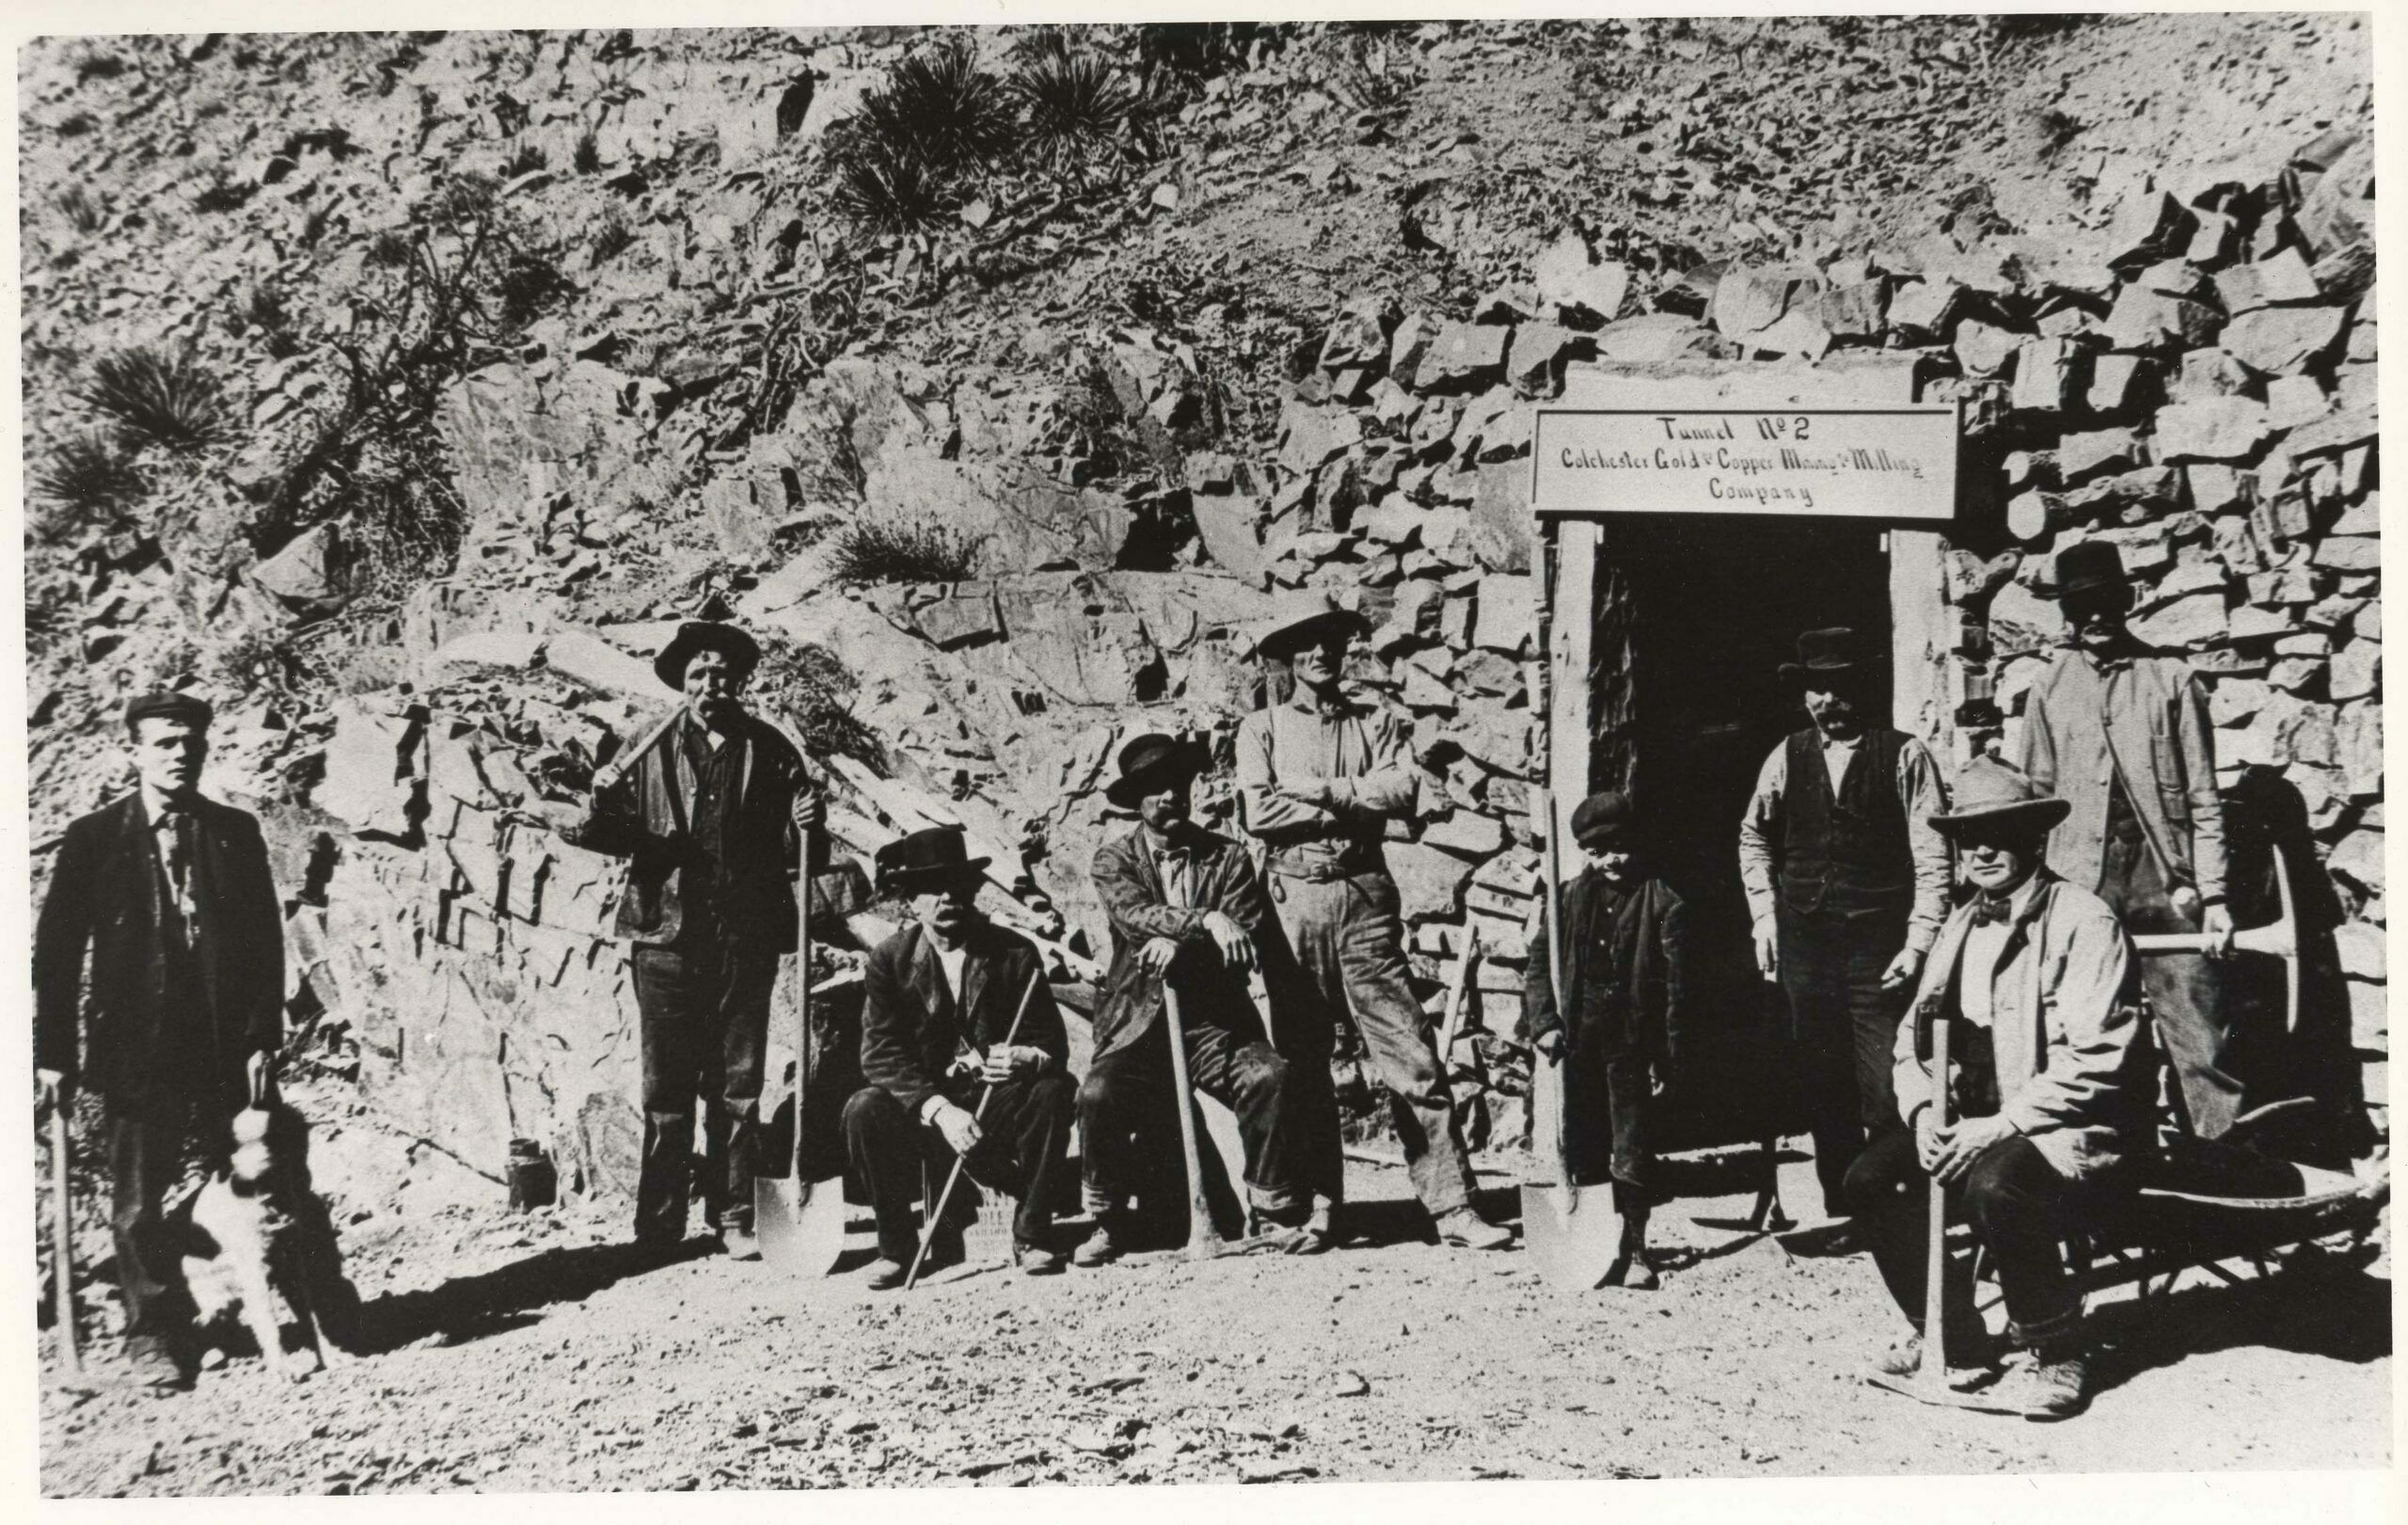 Increased mining activity – and some small financial successes in the late 1890’s – prompted a spate of prospecting by Salida businessmen and even a few children. They swarmed up the gulches northeast of town with picks, shovels and a little dynamite seeking “color.” They weren’t disappointed – at first – because they found showings of gold, silver, copper and lead. For a time during the winter of 1895-96, many businesses closed early so proprietors could go “mining.” One of those efforts was the Colchester Mining and Milling Company, which dug two tunnels – No. 2 above – into the side of the mountain between Cleora and the mouth of today’s Longfellow Gulch. In the first photo, Thomas T Foster stands at left of the entrance to tunnel No. 2, arms folded across his chest. The boy with the shovel is his son, William Garnet Foster. The man in the vest is unidentified, as is the seated man; Richard Milton Bratton stands at the far right. The other men in the operation are unidentified. No. 1 tunnel is just above the level of the D&RG mainline and about 100 yards away on a “gentle slope, just right for men pushing loaded ore cars to the railroad,” according to a Salida Mail article. Tunnel No. 2 is a few hundred feet above and a little east of the discovery opening. Plans were to connect the two inside the mountain, but ore ran out before then.  (1)